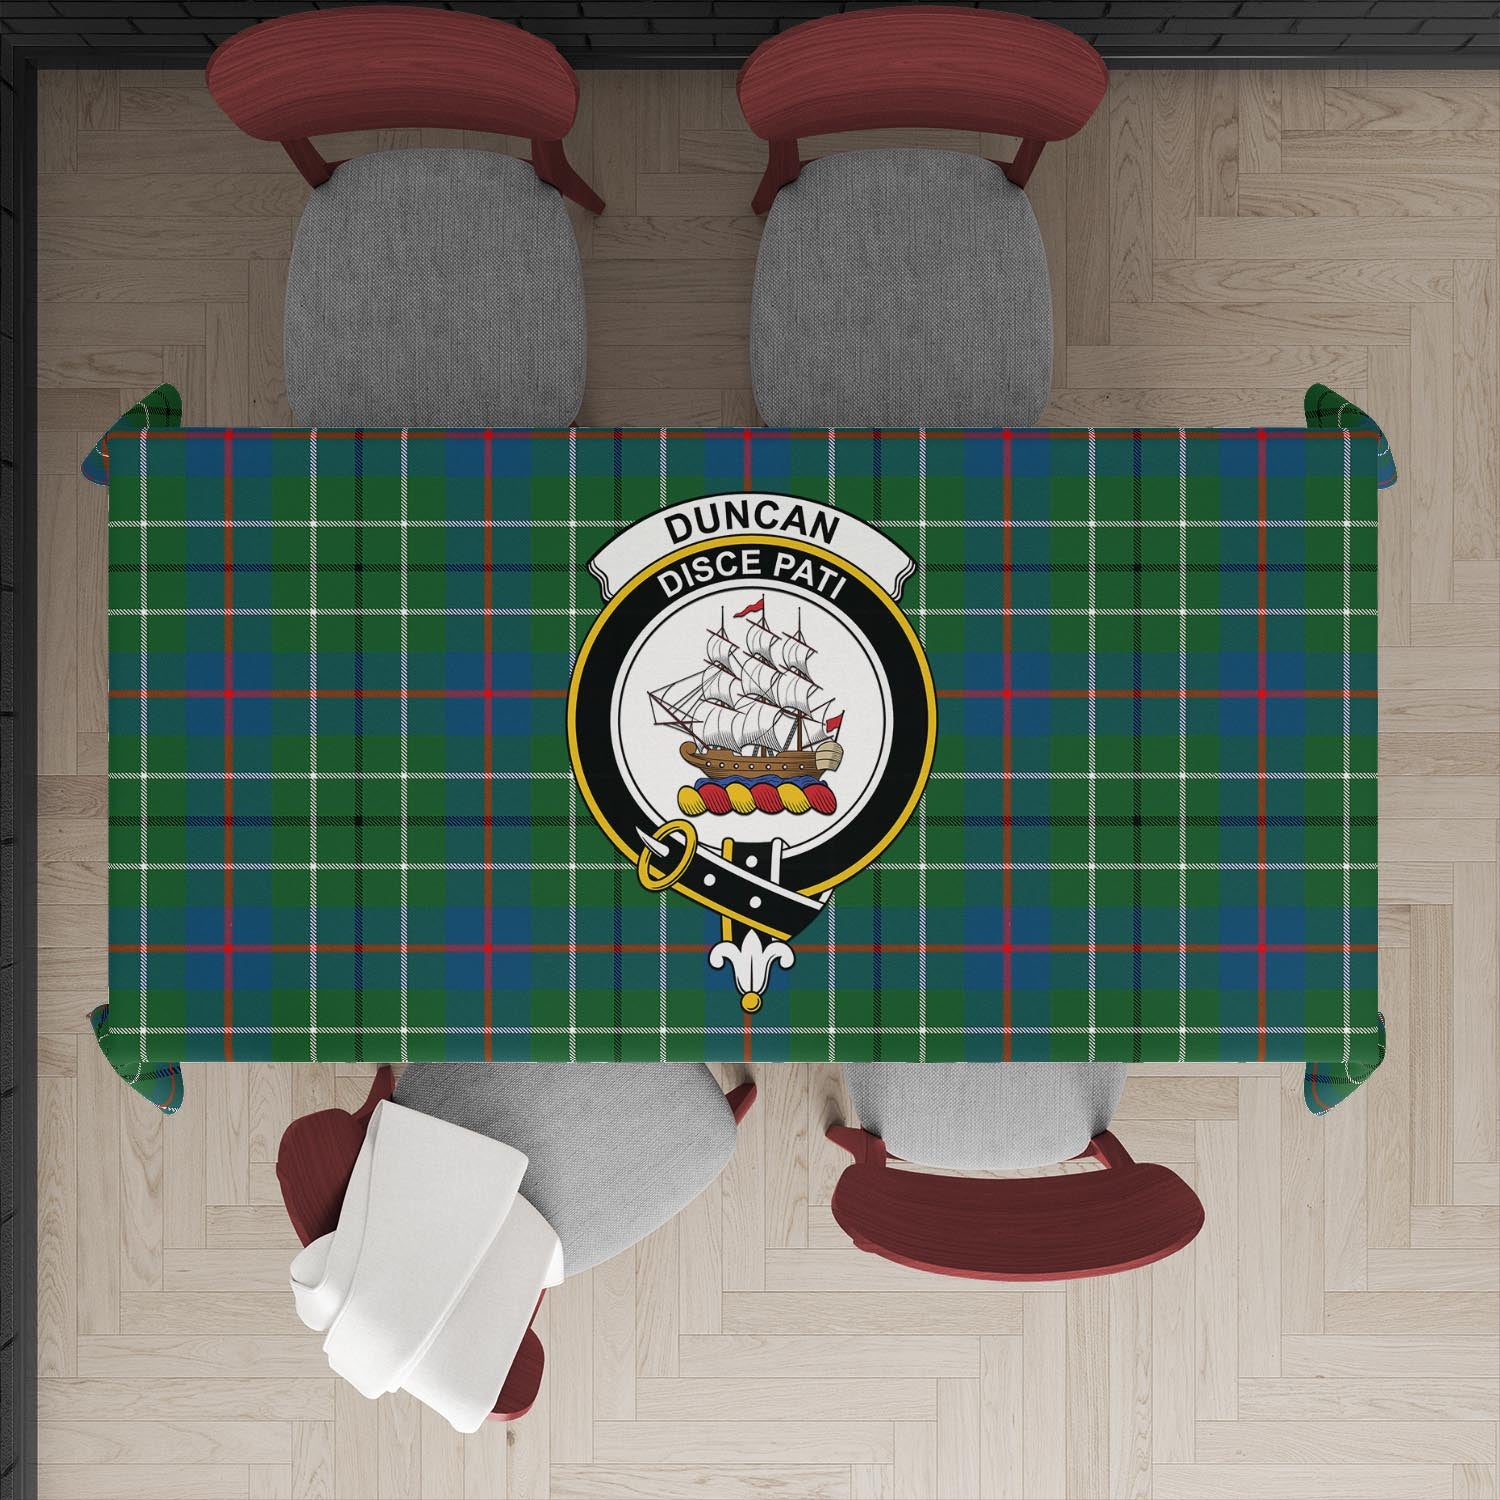 duncan-ancient-tatan-tablecloth-with-family-crest